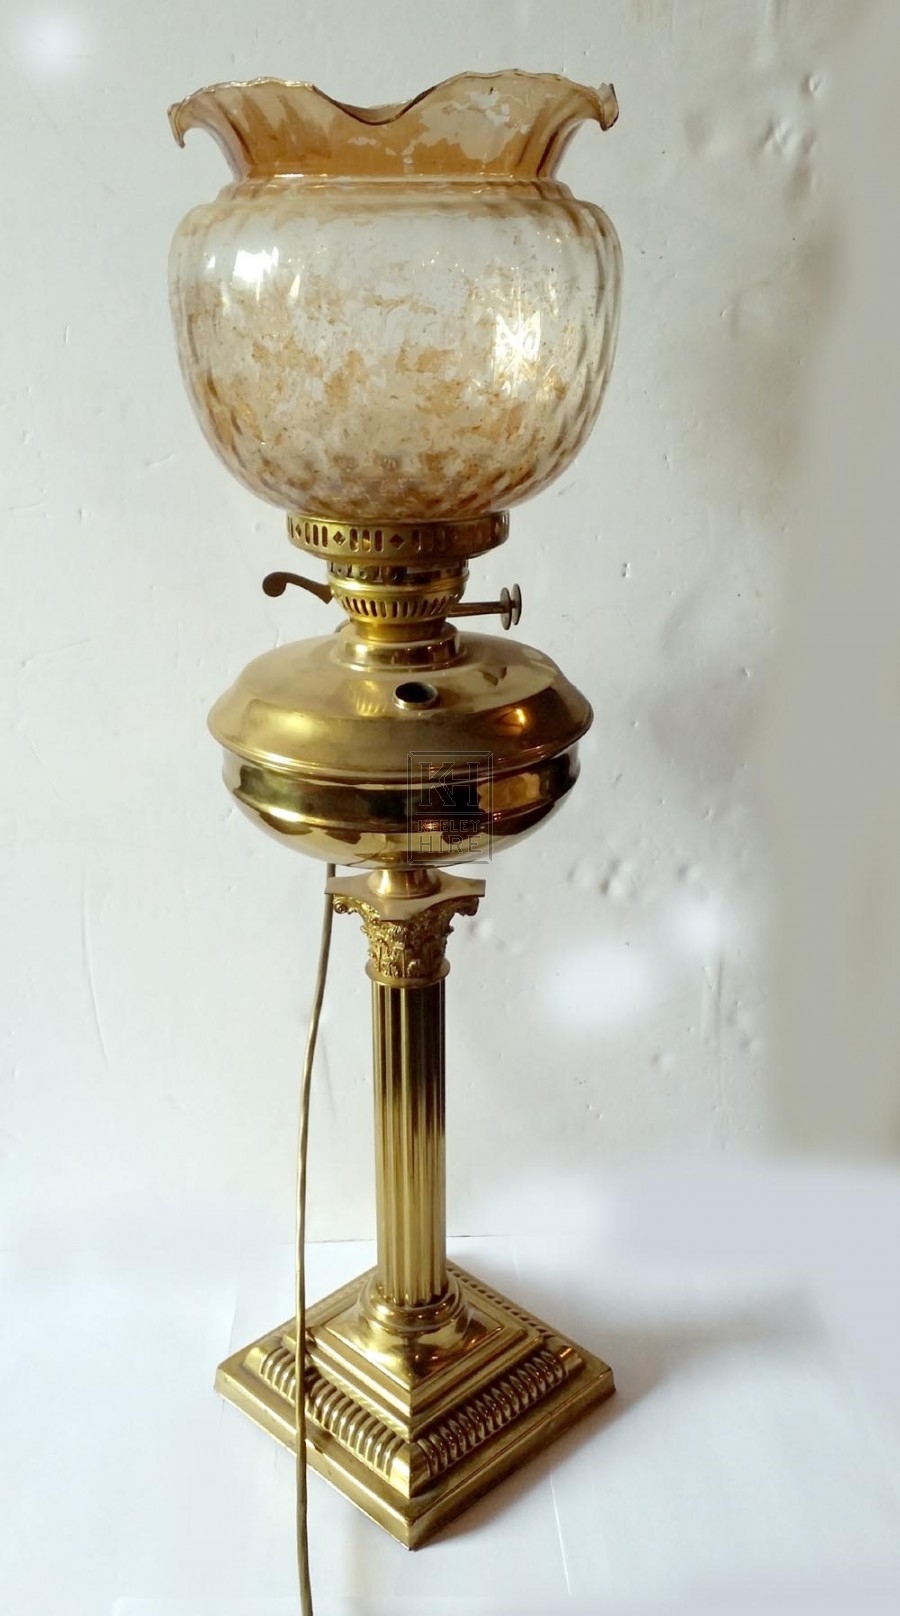 Ornate brass oil lamp with glass shade